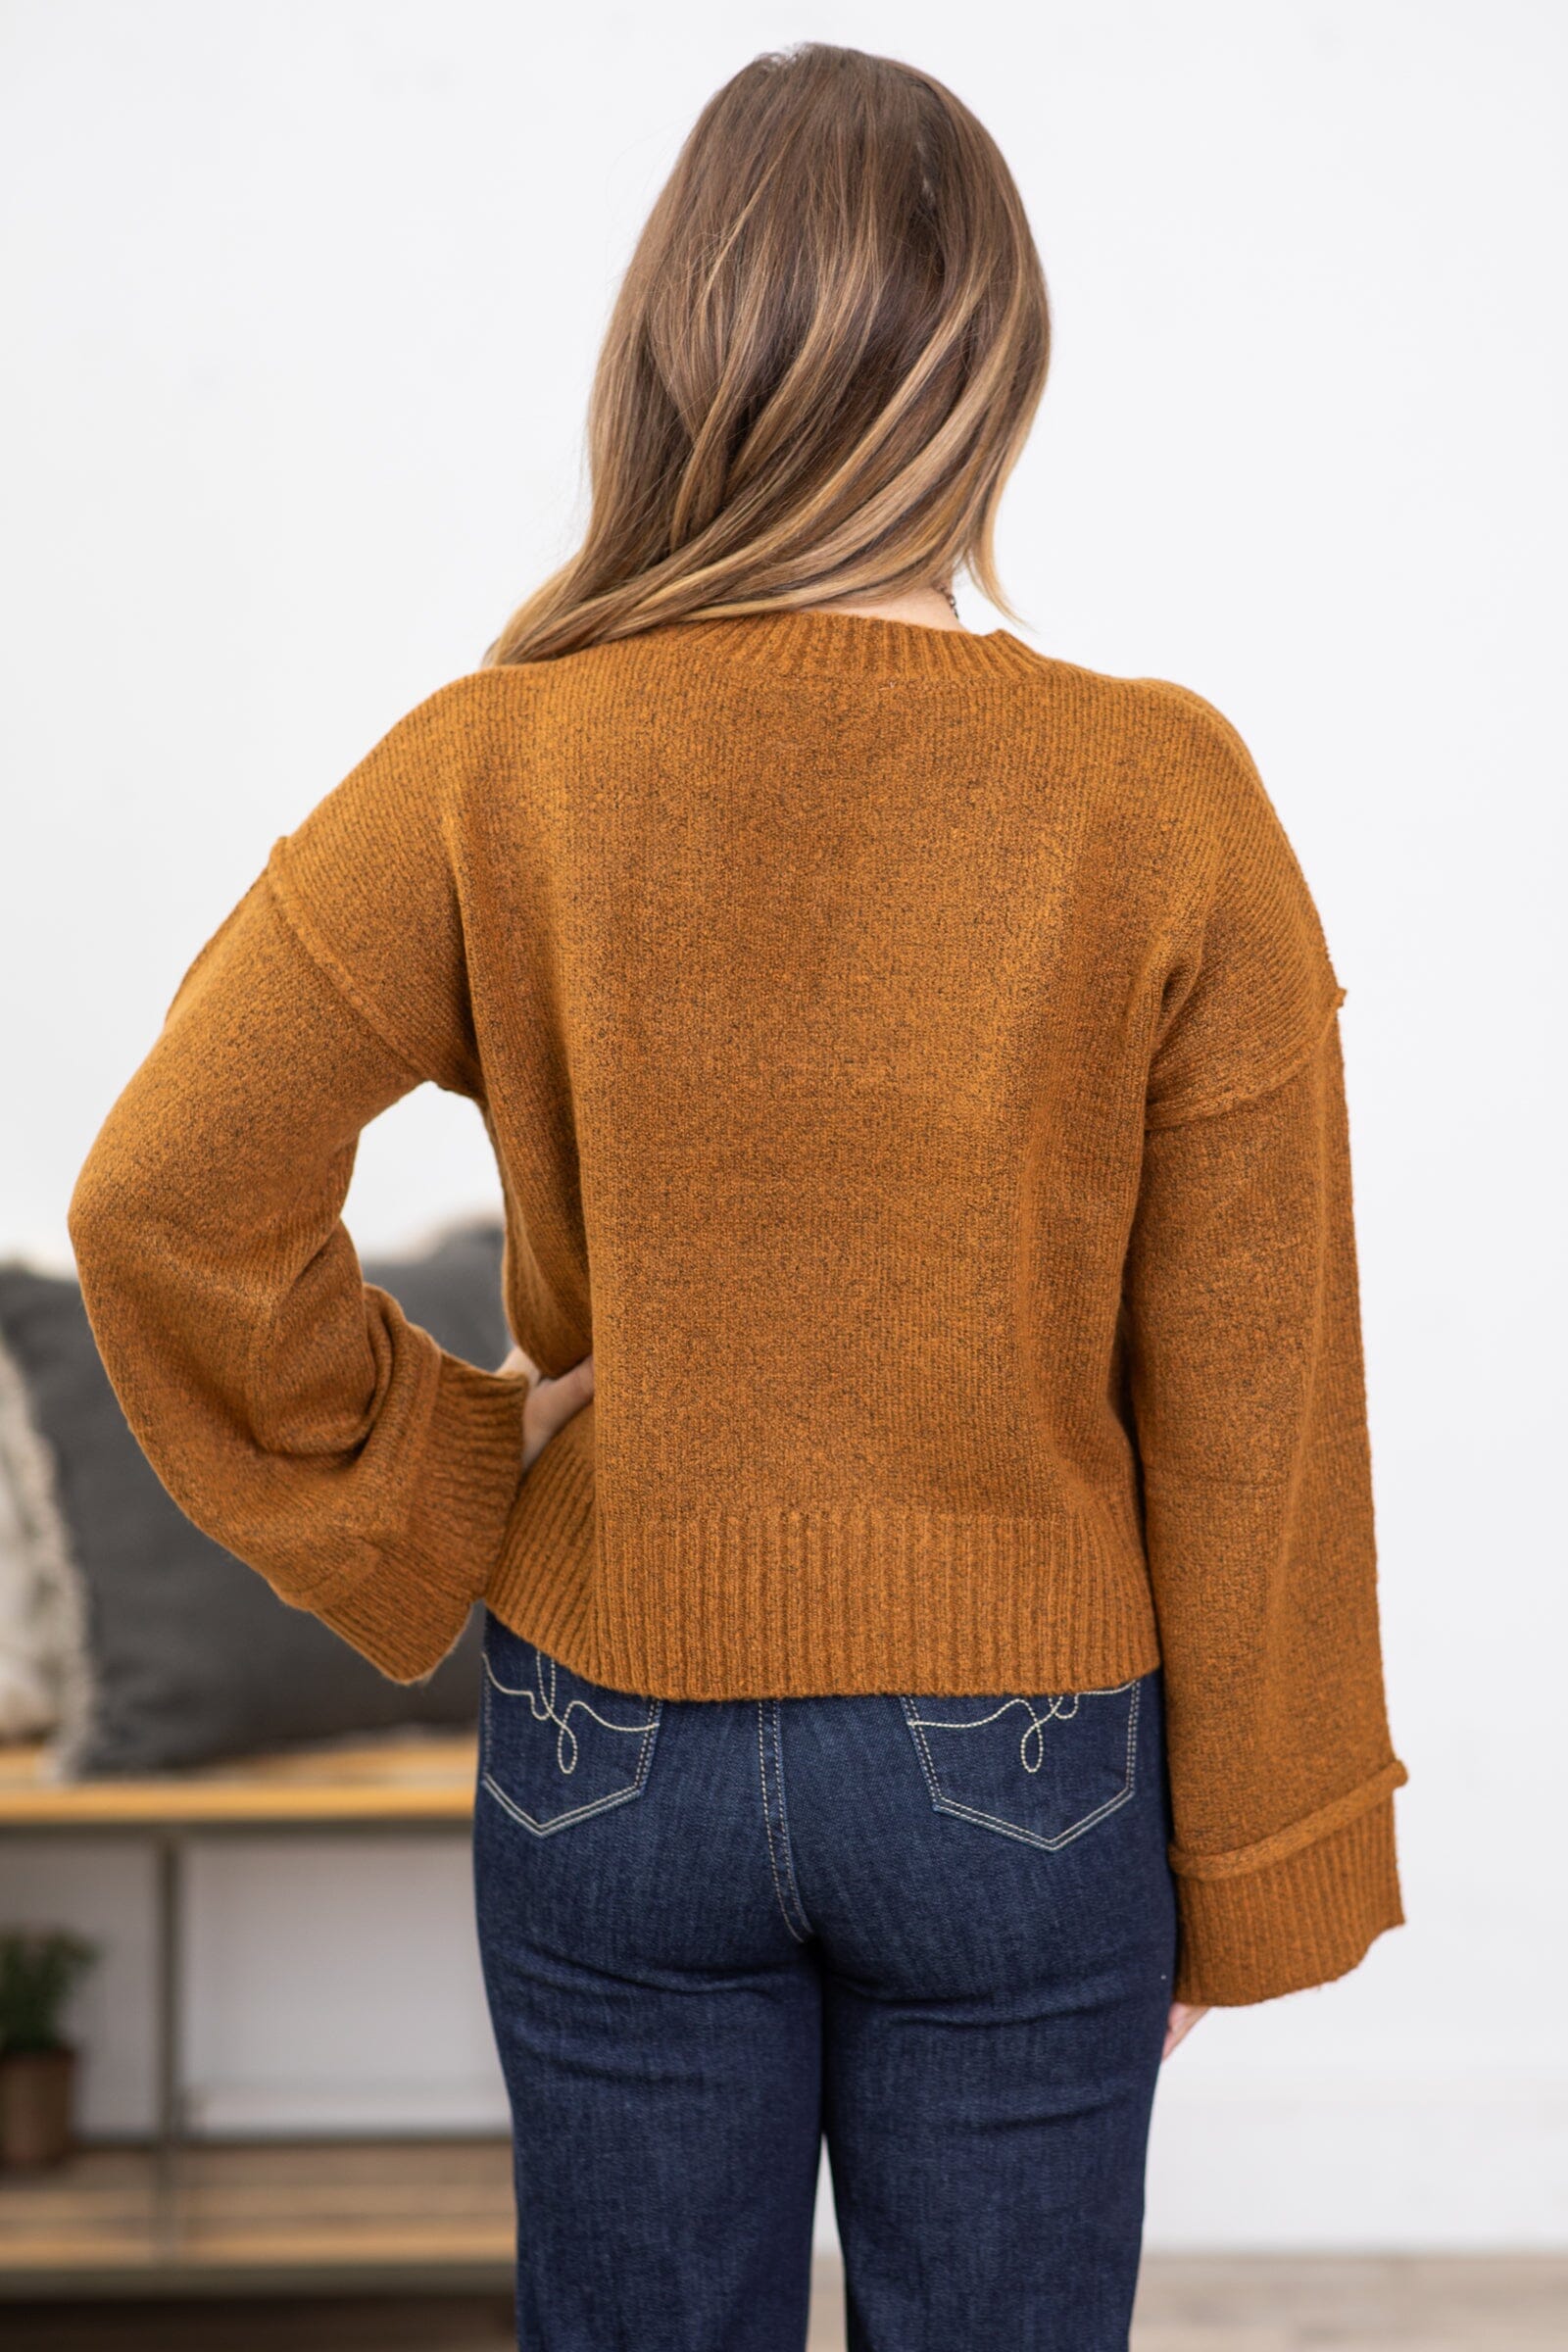 Copper Ribbed Trim Crew Neck Sweater - Filly Flair